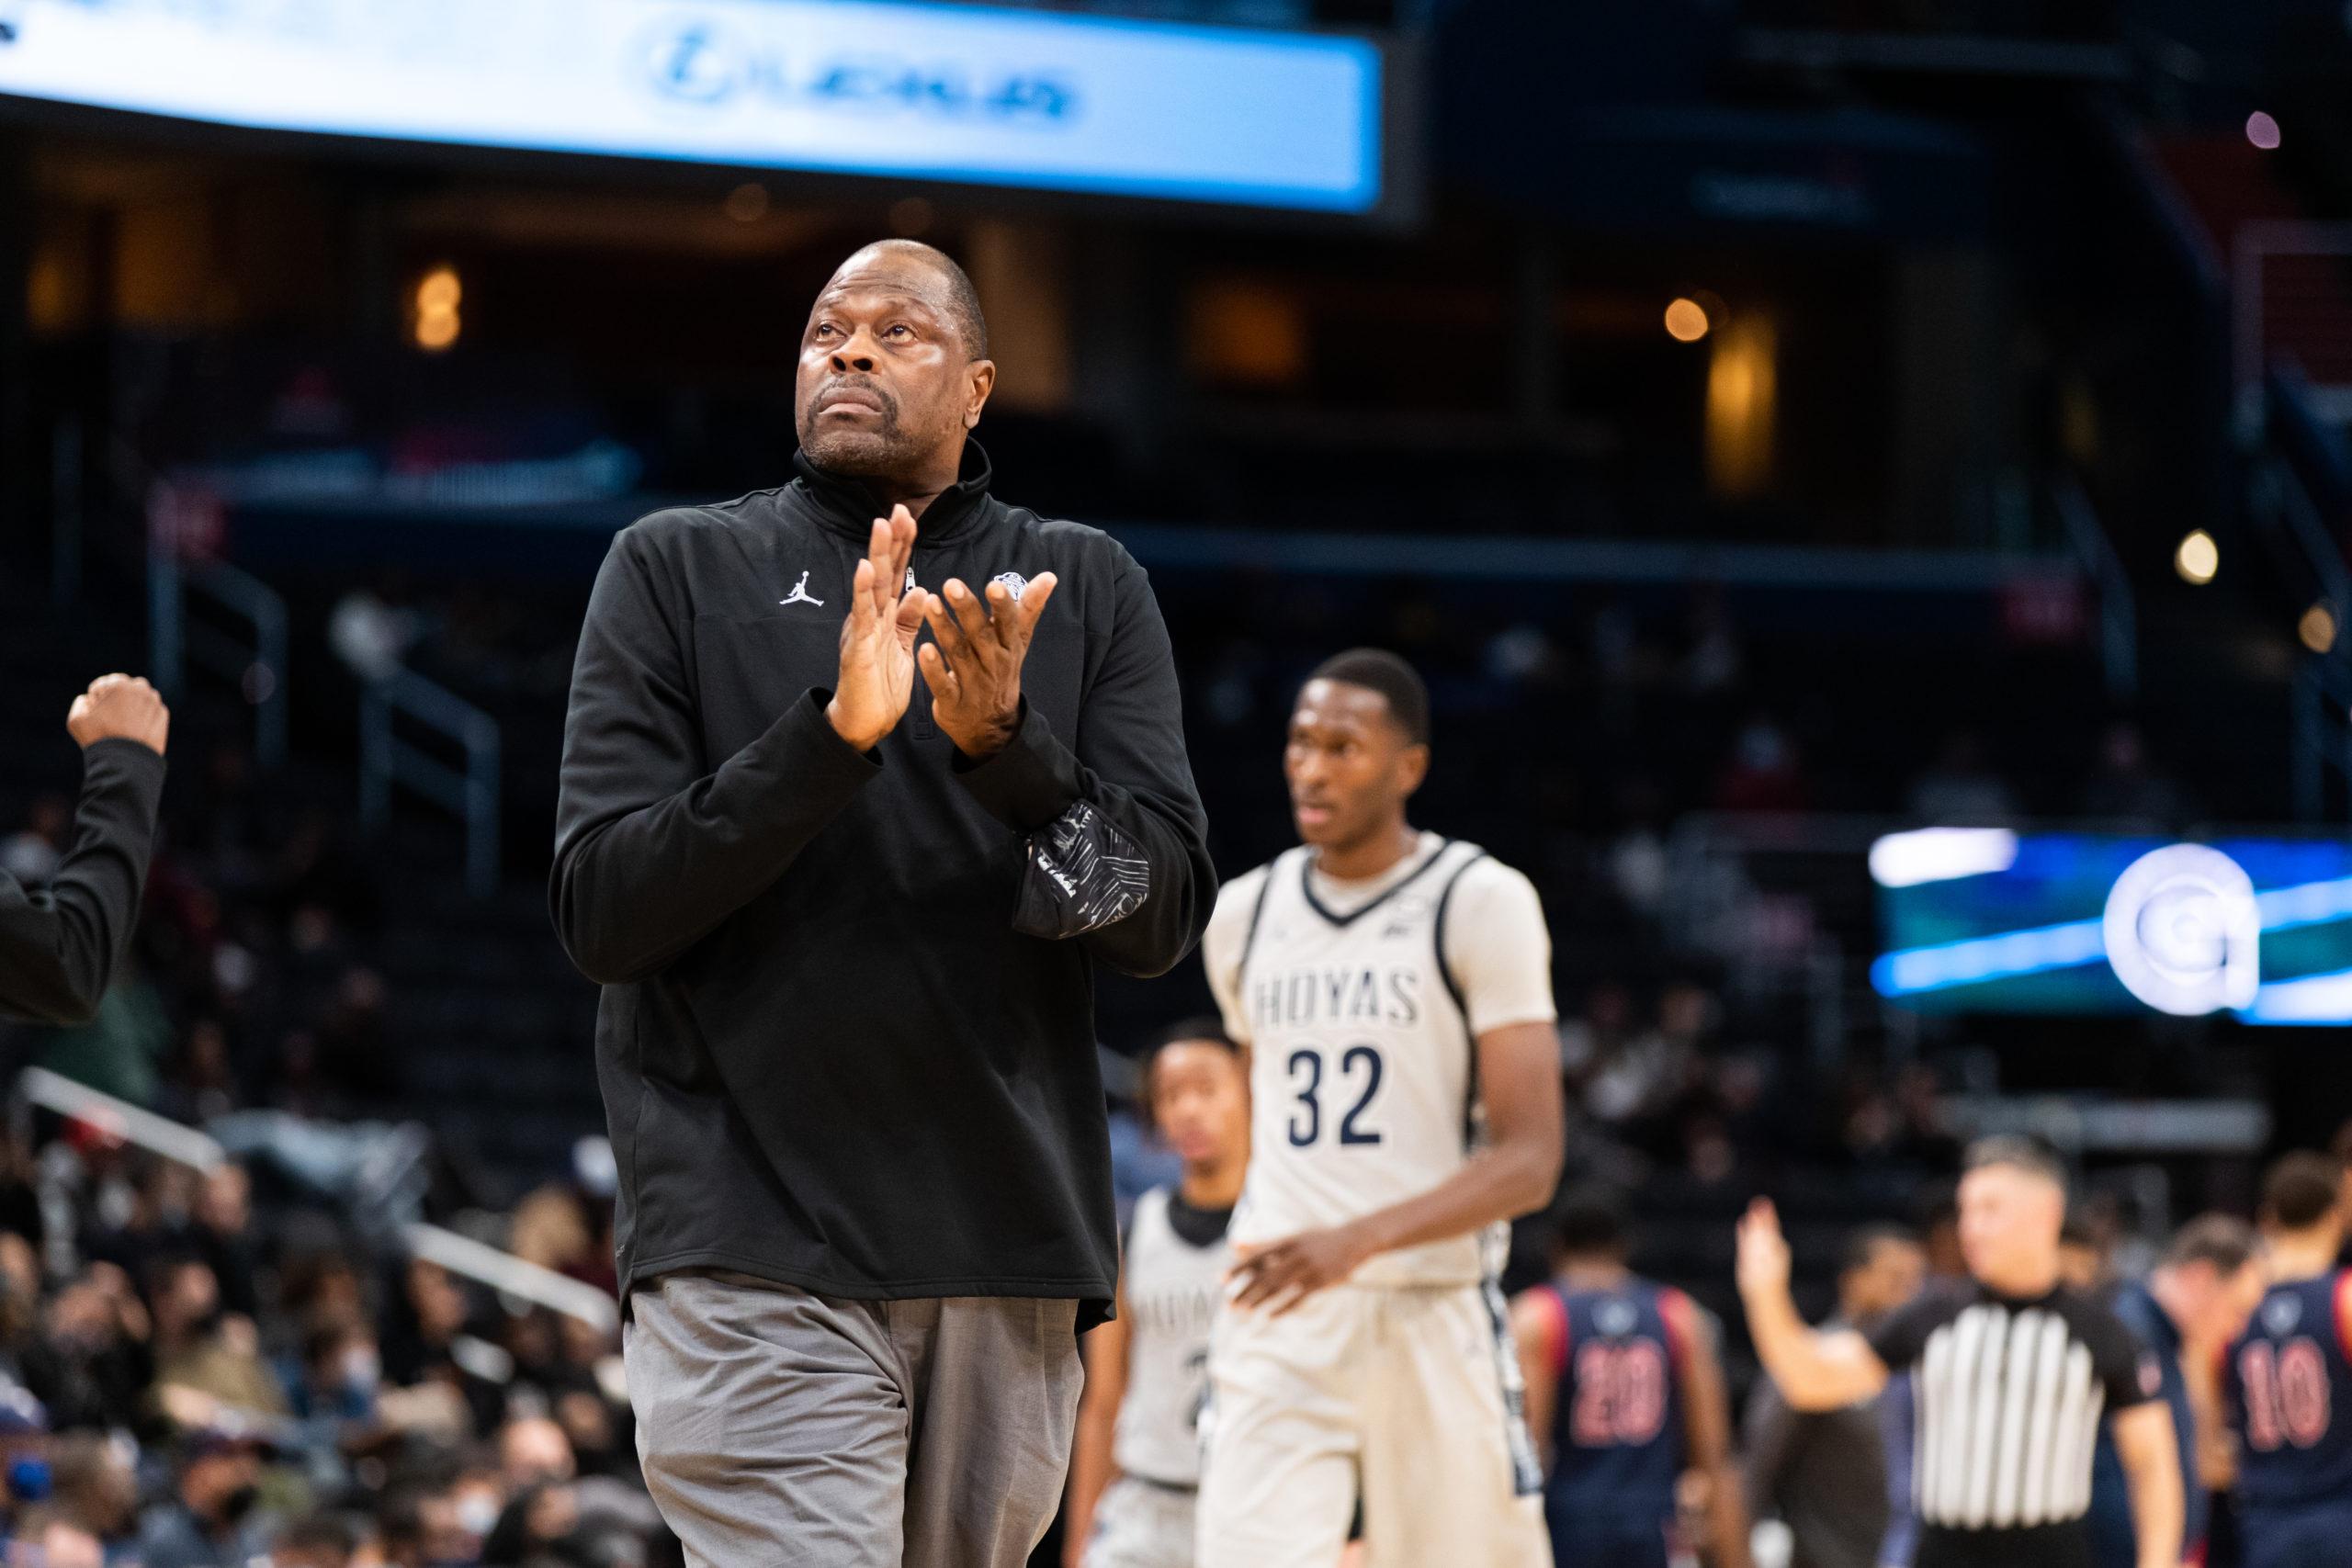 Patrick Ewing, Biography, Georgetown, & Facts